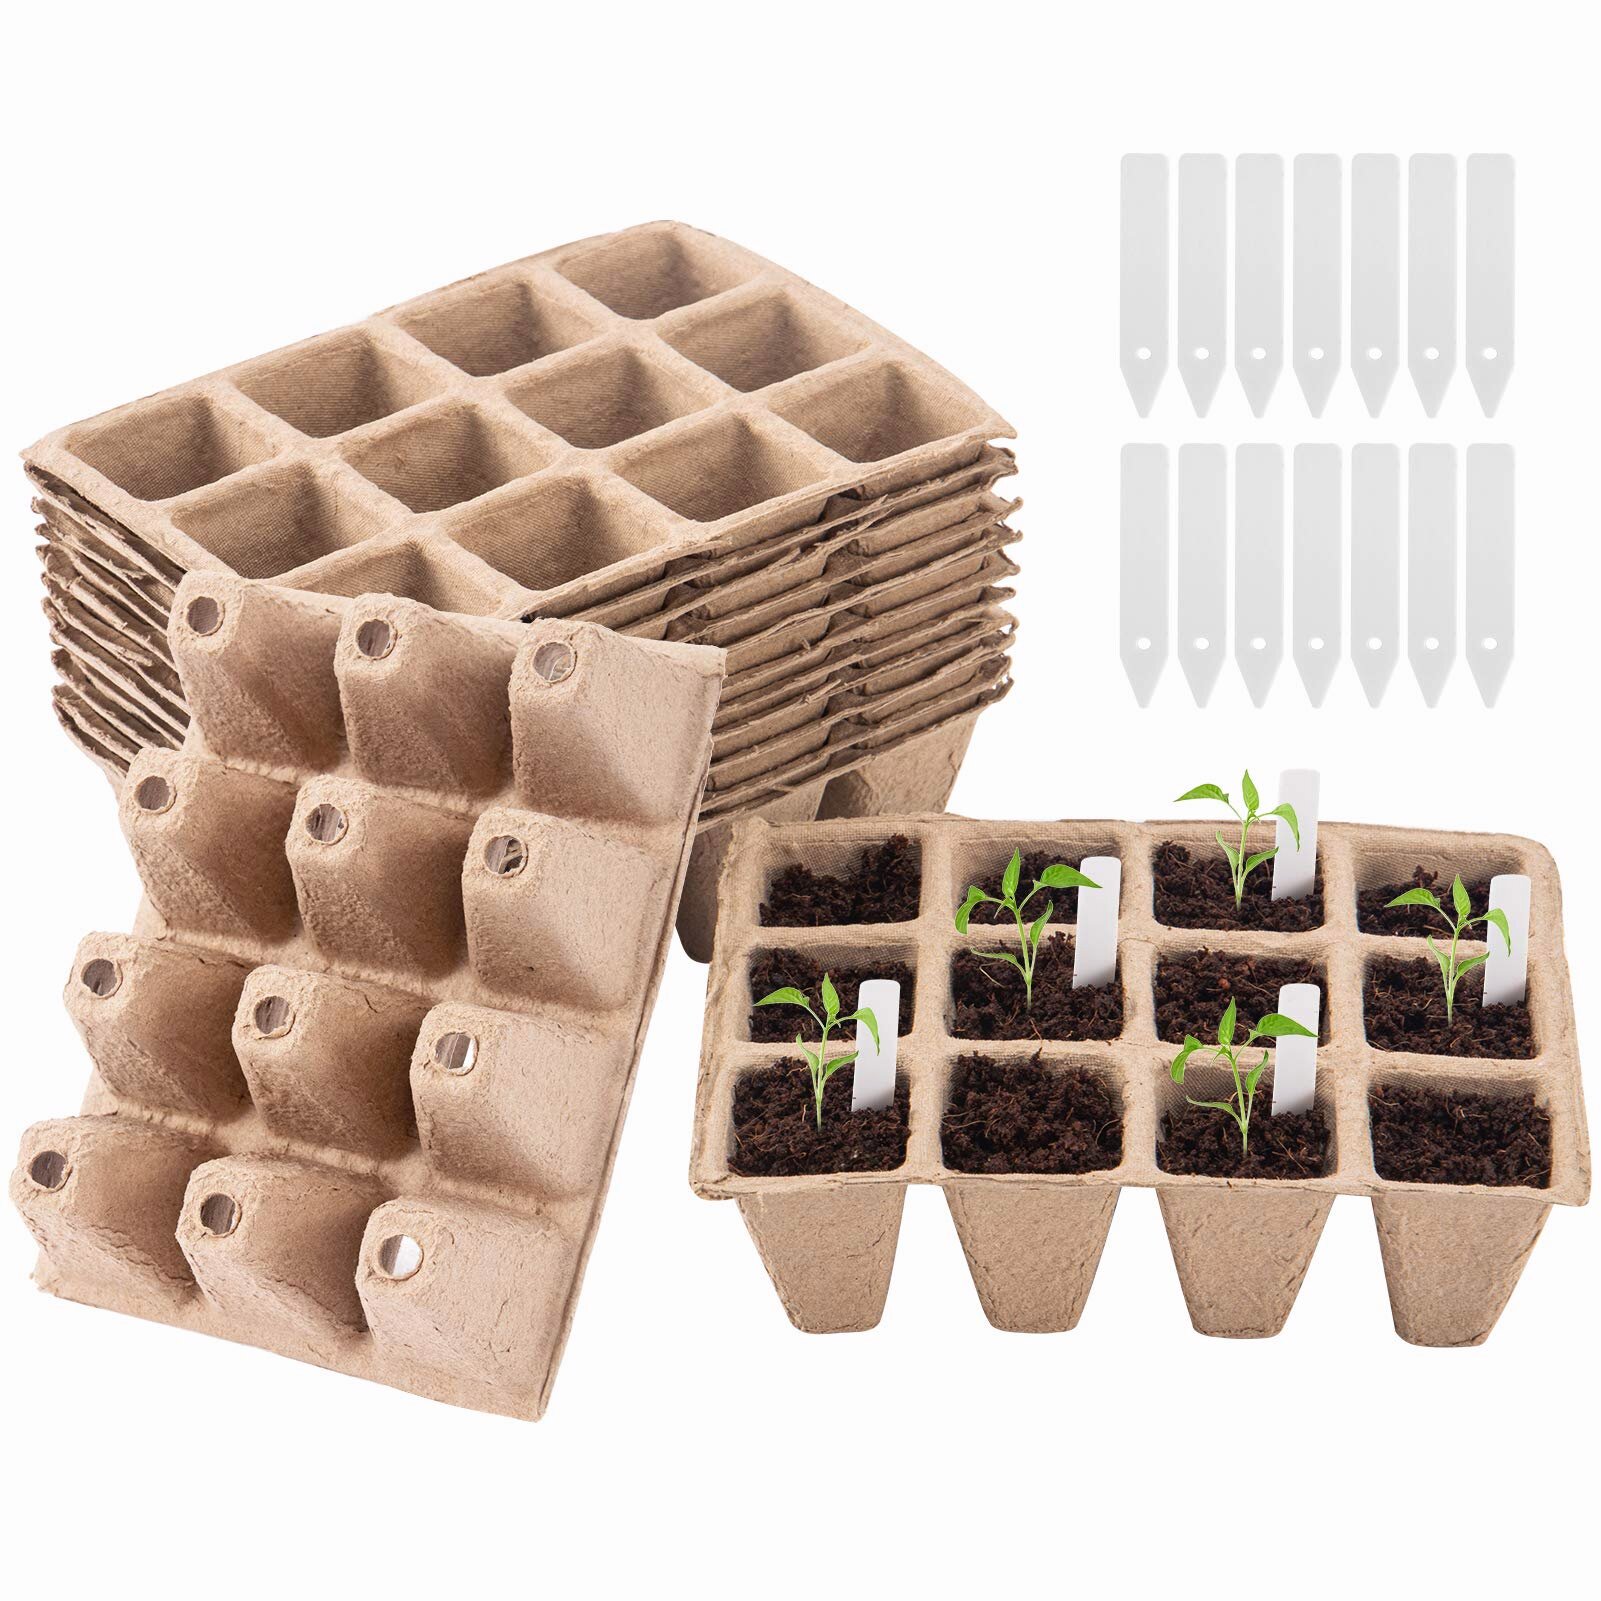 Eco Friendly Seedling Germination Trays for Gardens Nurseries and Greenhouses Fruit Biodegradable Seedling Starter Trays Vegetable Patches 12 Pack